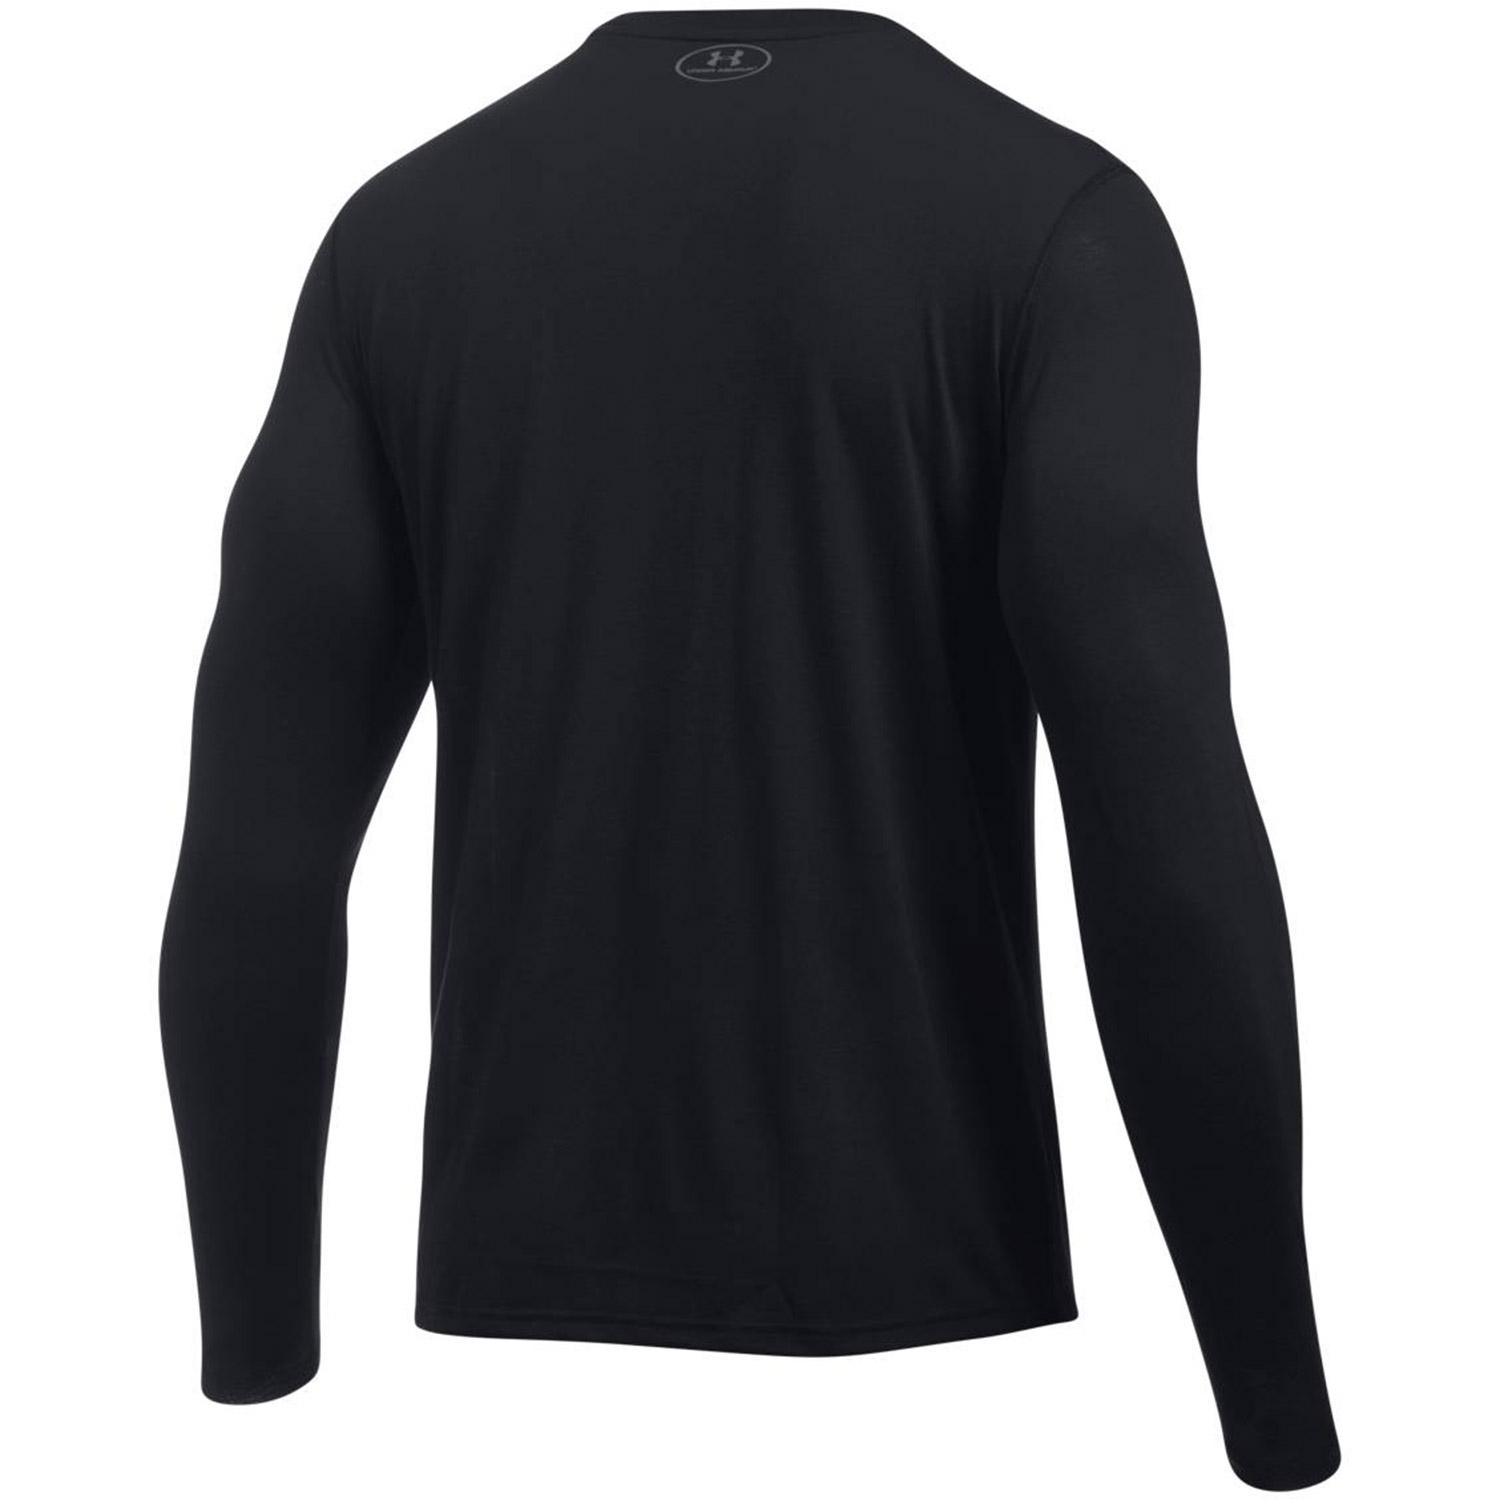 Under Armour Mens Fitted Long Sleeve Top - Black - Tennisnuts.com